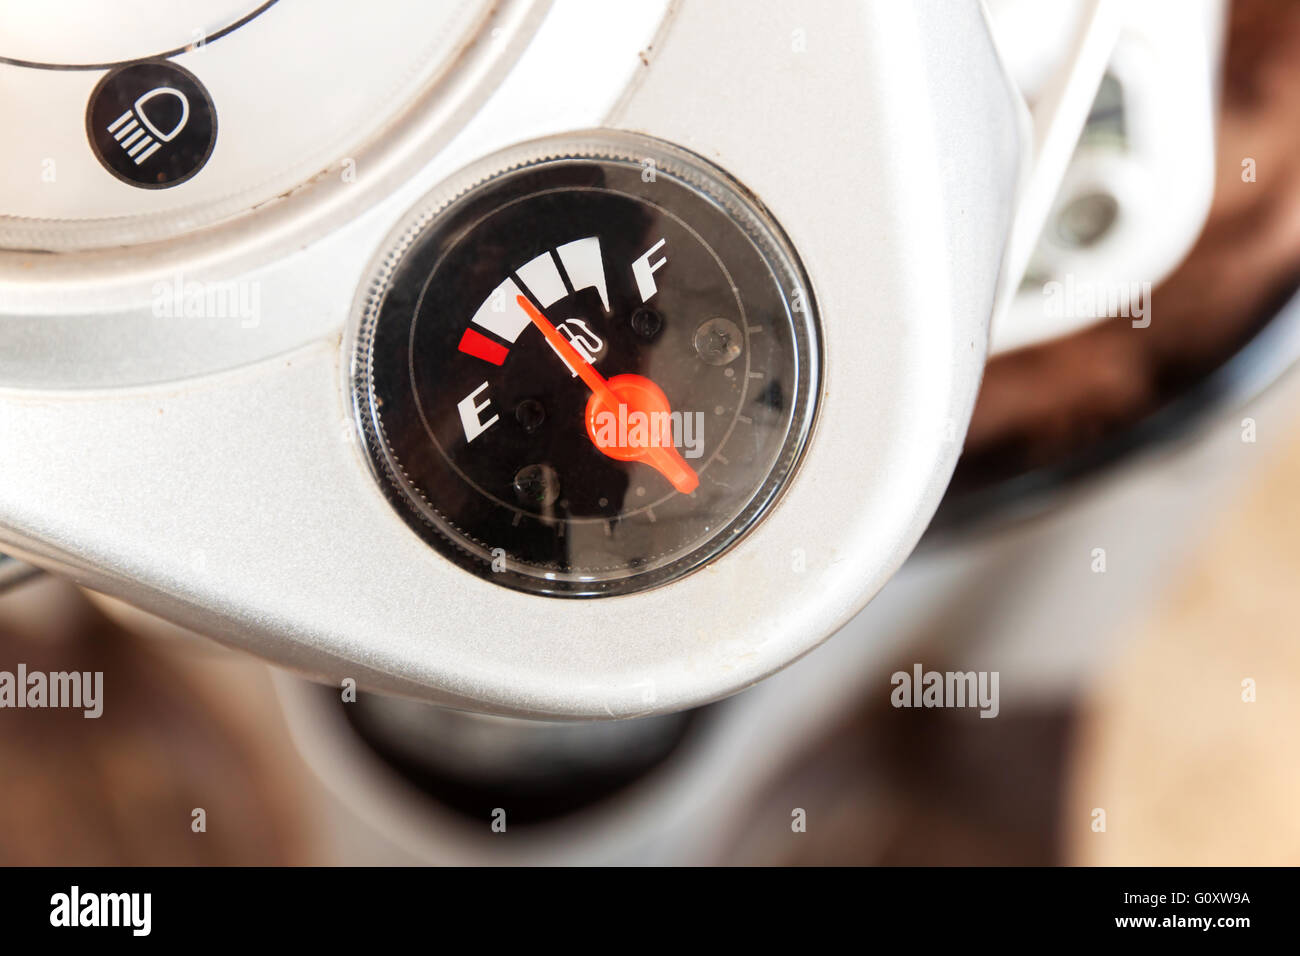 Motorcycle fuel gauge displays at middle point Stock Photo